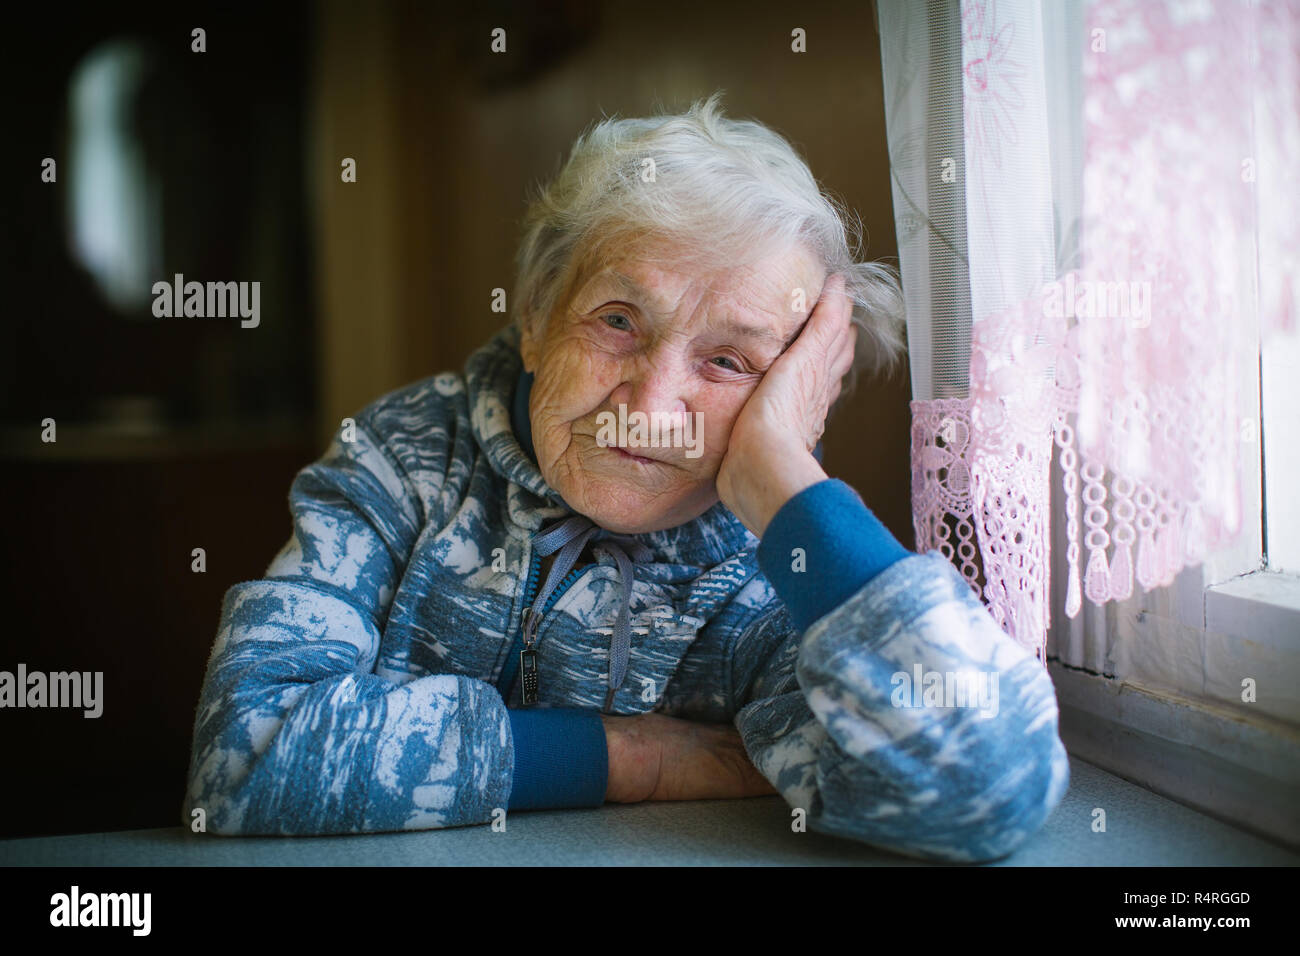 Portrait of russian elderly woman close-up. Age 90 years old. Stock Photo